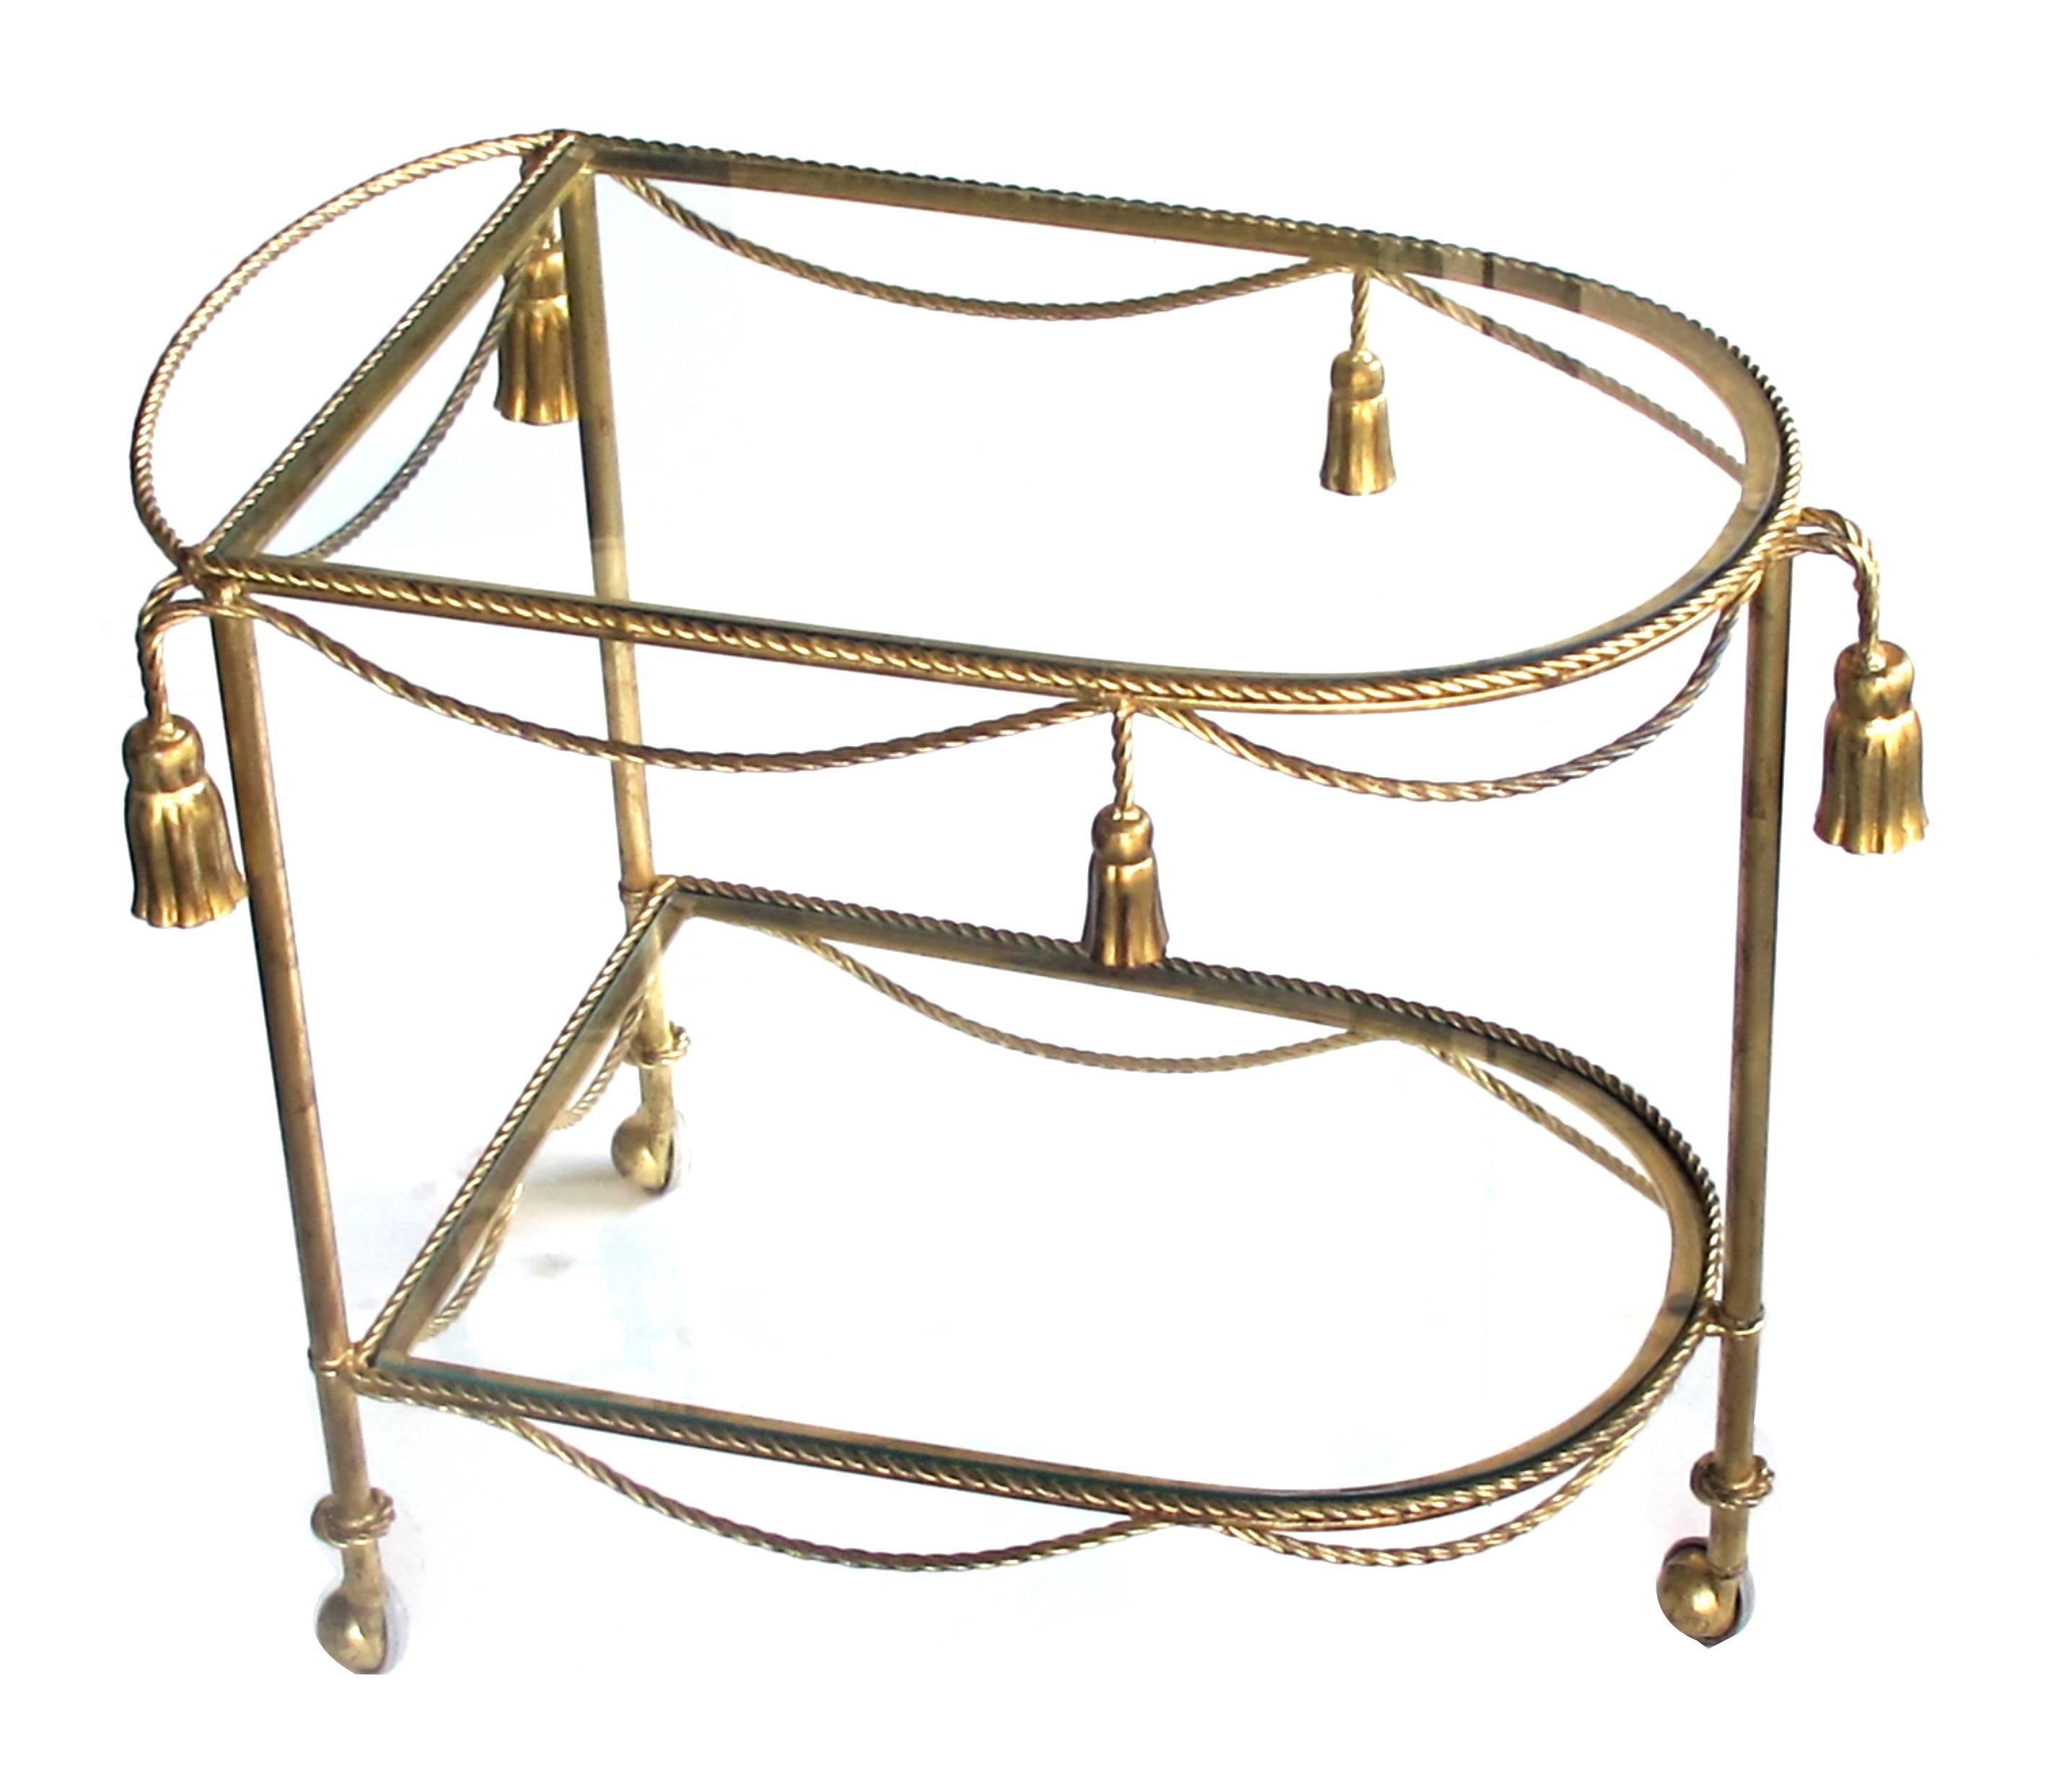 A chic pair of Italian Mid-Century Hollywood Regency gilt-tole drinks/bar carts with glass shelves; each drinks cart with rope-twist frame adorned with swags and tassels; fitted with 2 glass shelves.